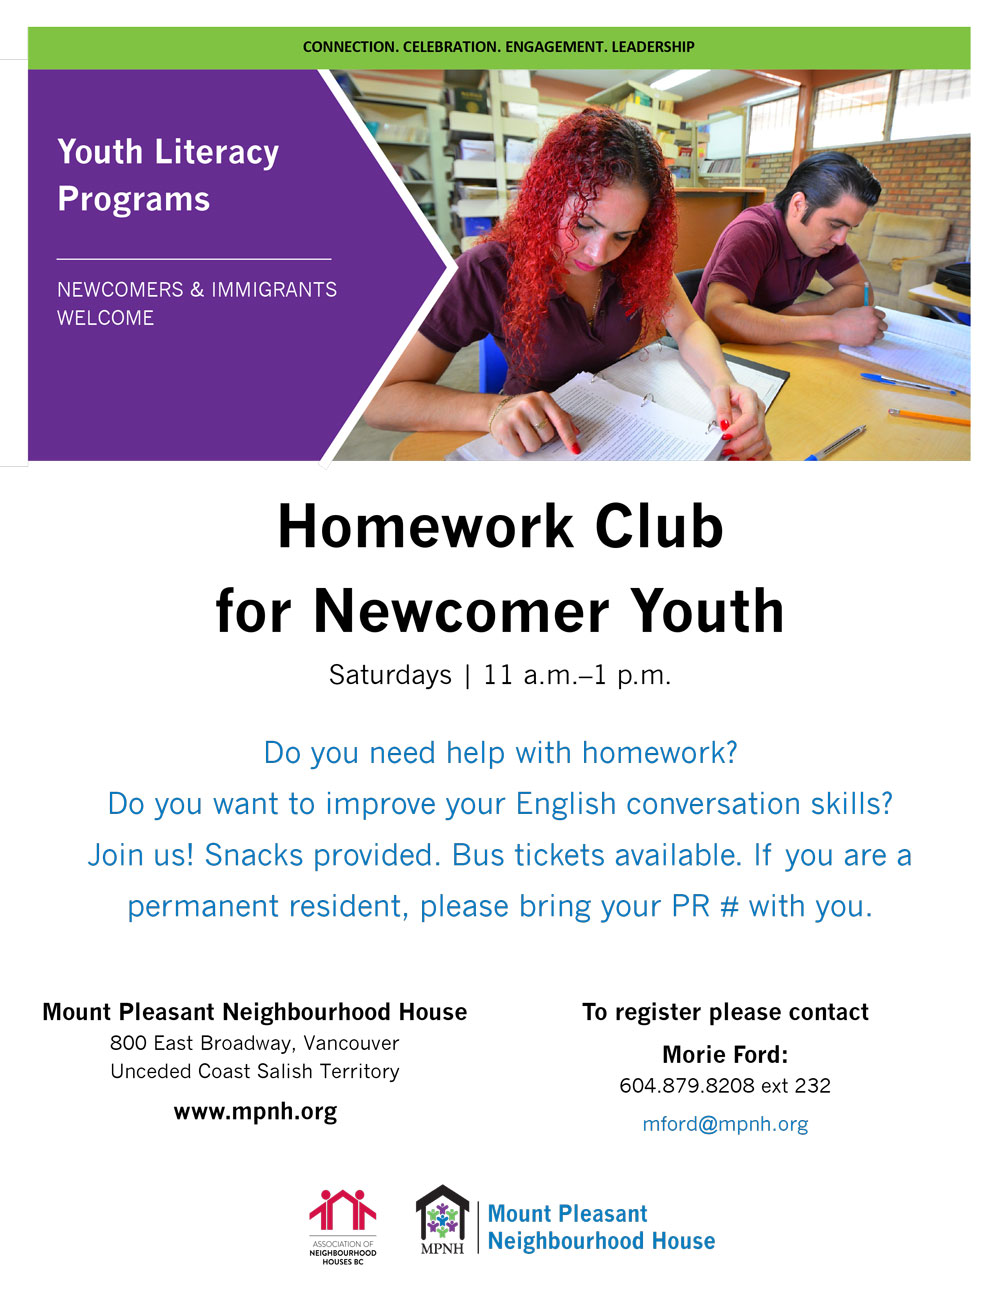 Poster for the homework club for newcomer youth showing a teenage girl studying